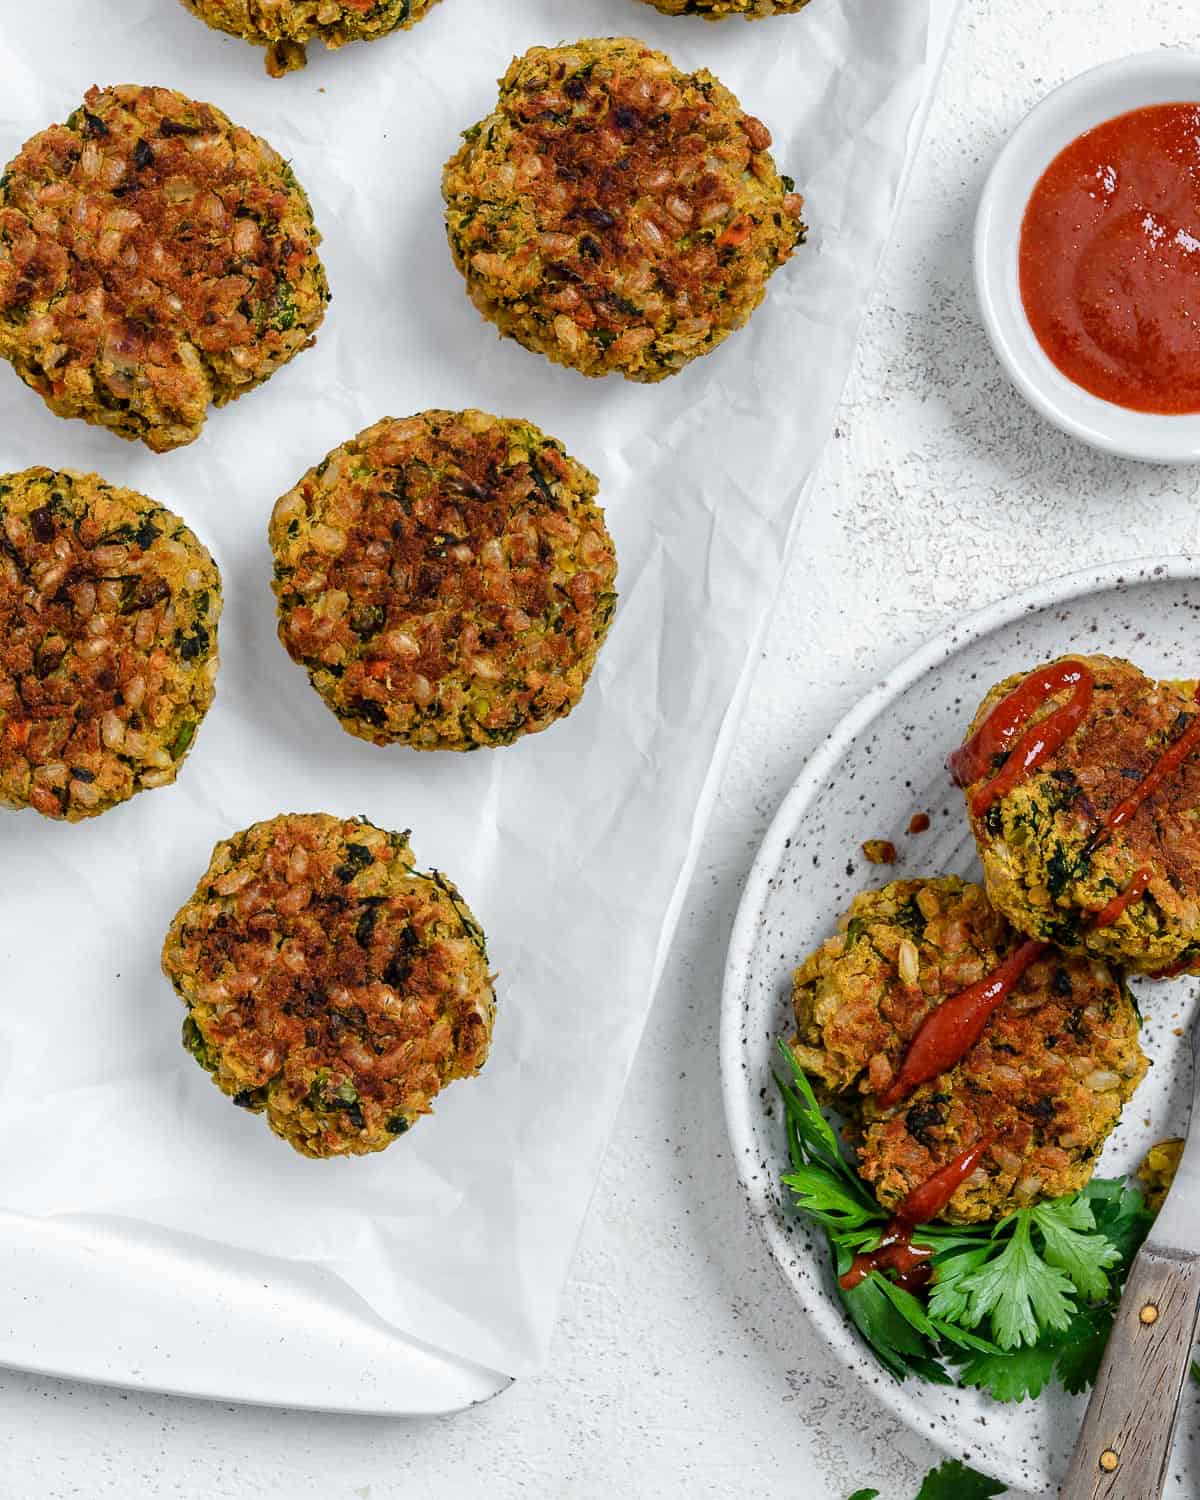 ready-made kichari lentil patties, layered with patties in the background